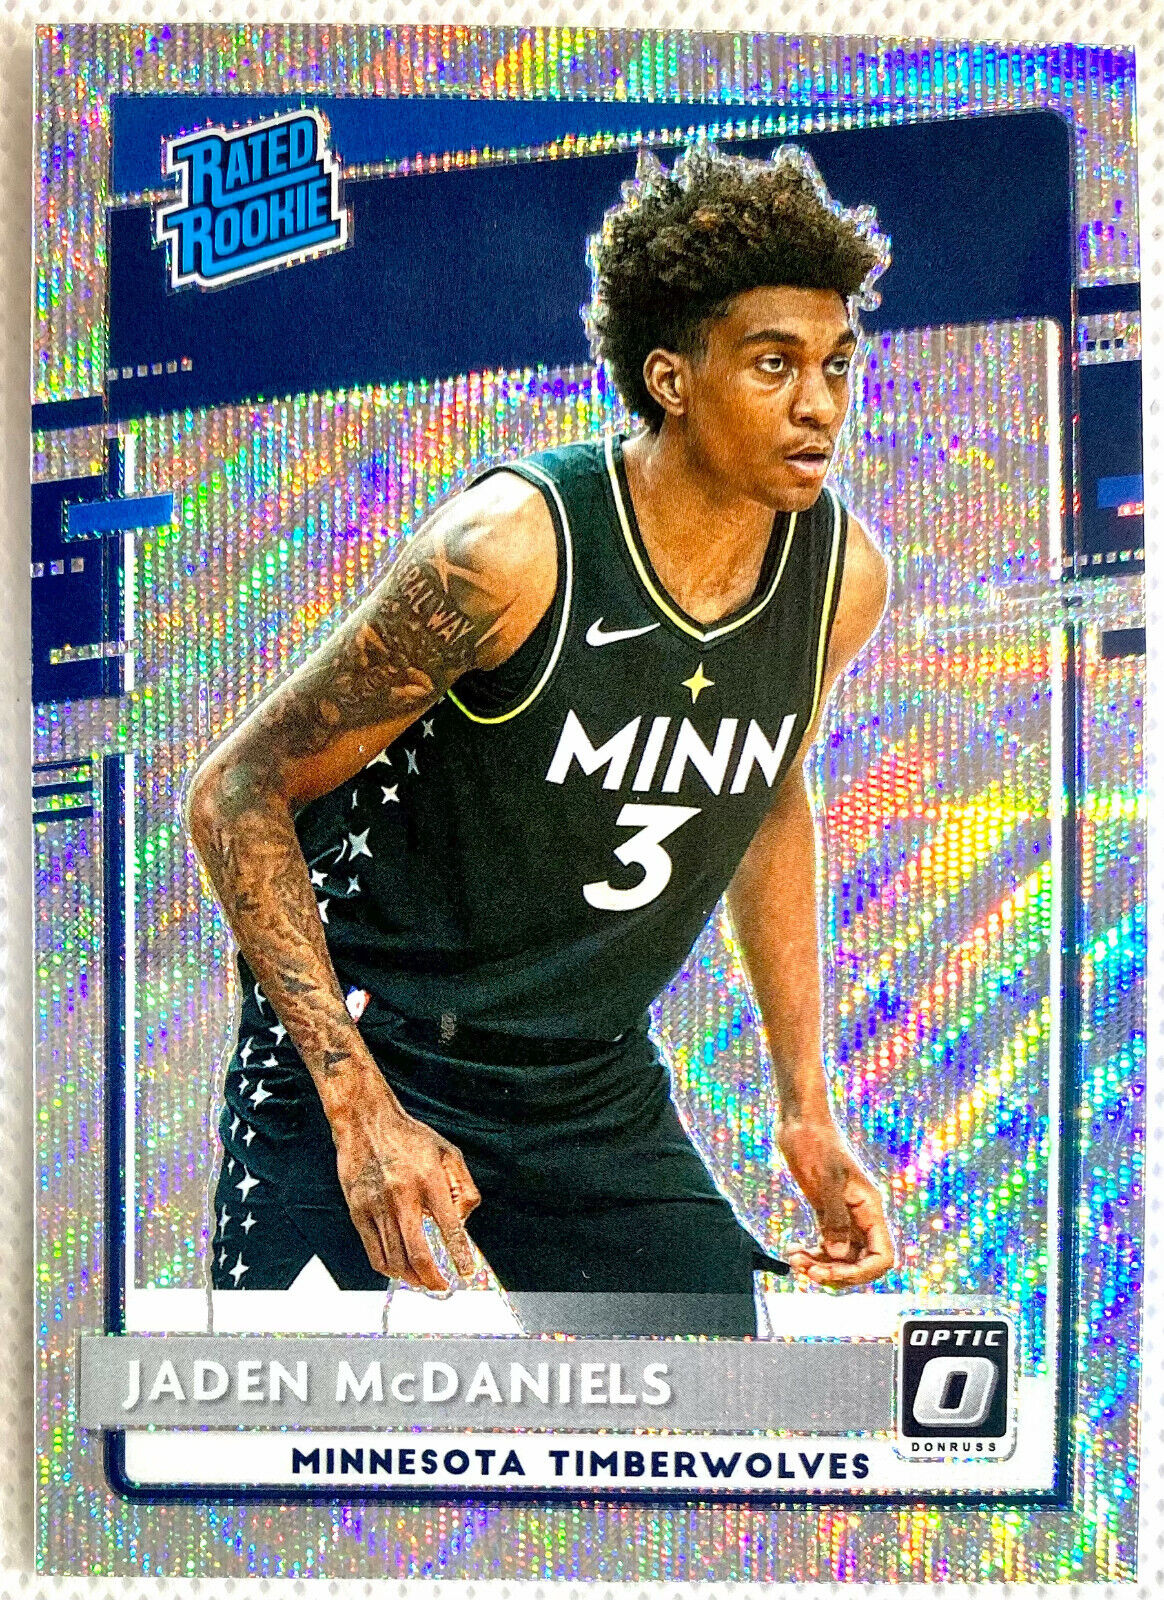 2020-21 Donruss Optic Jaden McDaniels Rated Rookie Silver Wave Prizm Card RC